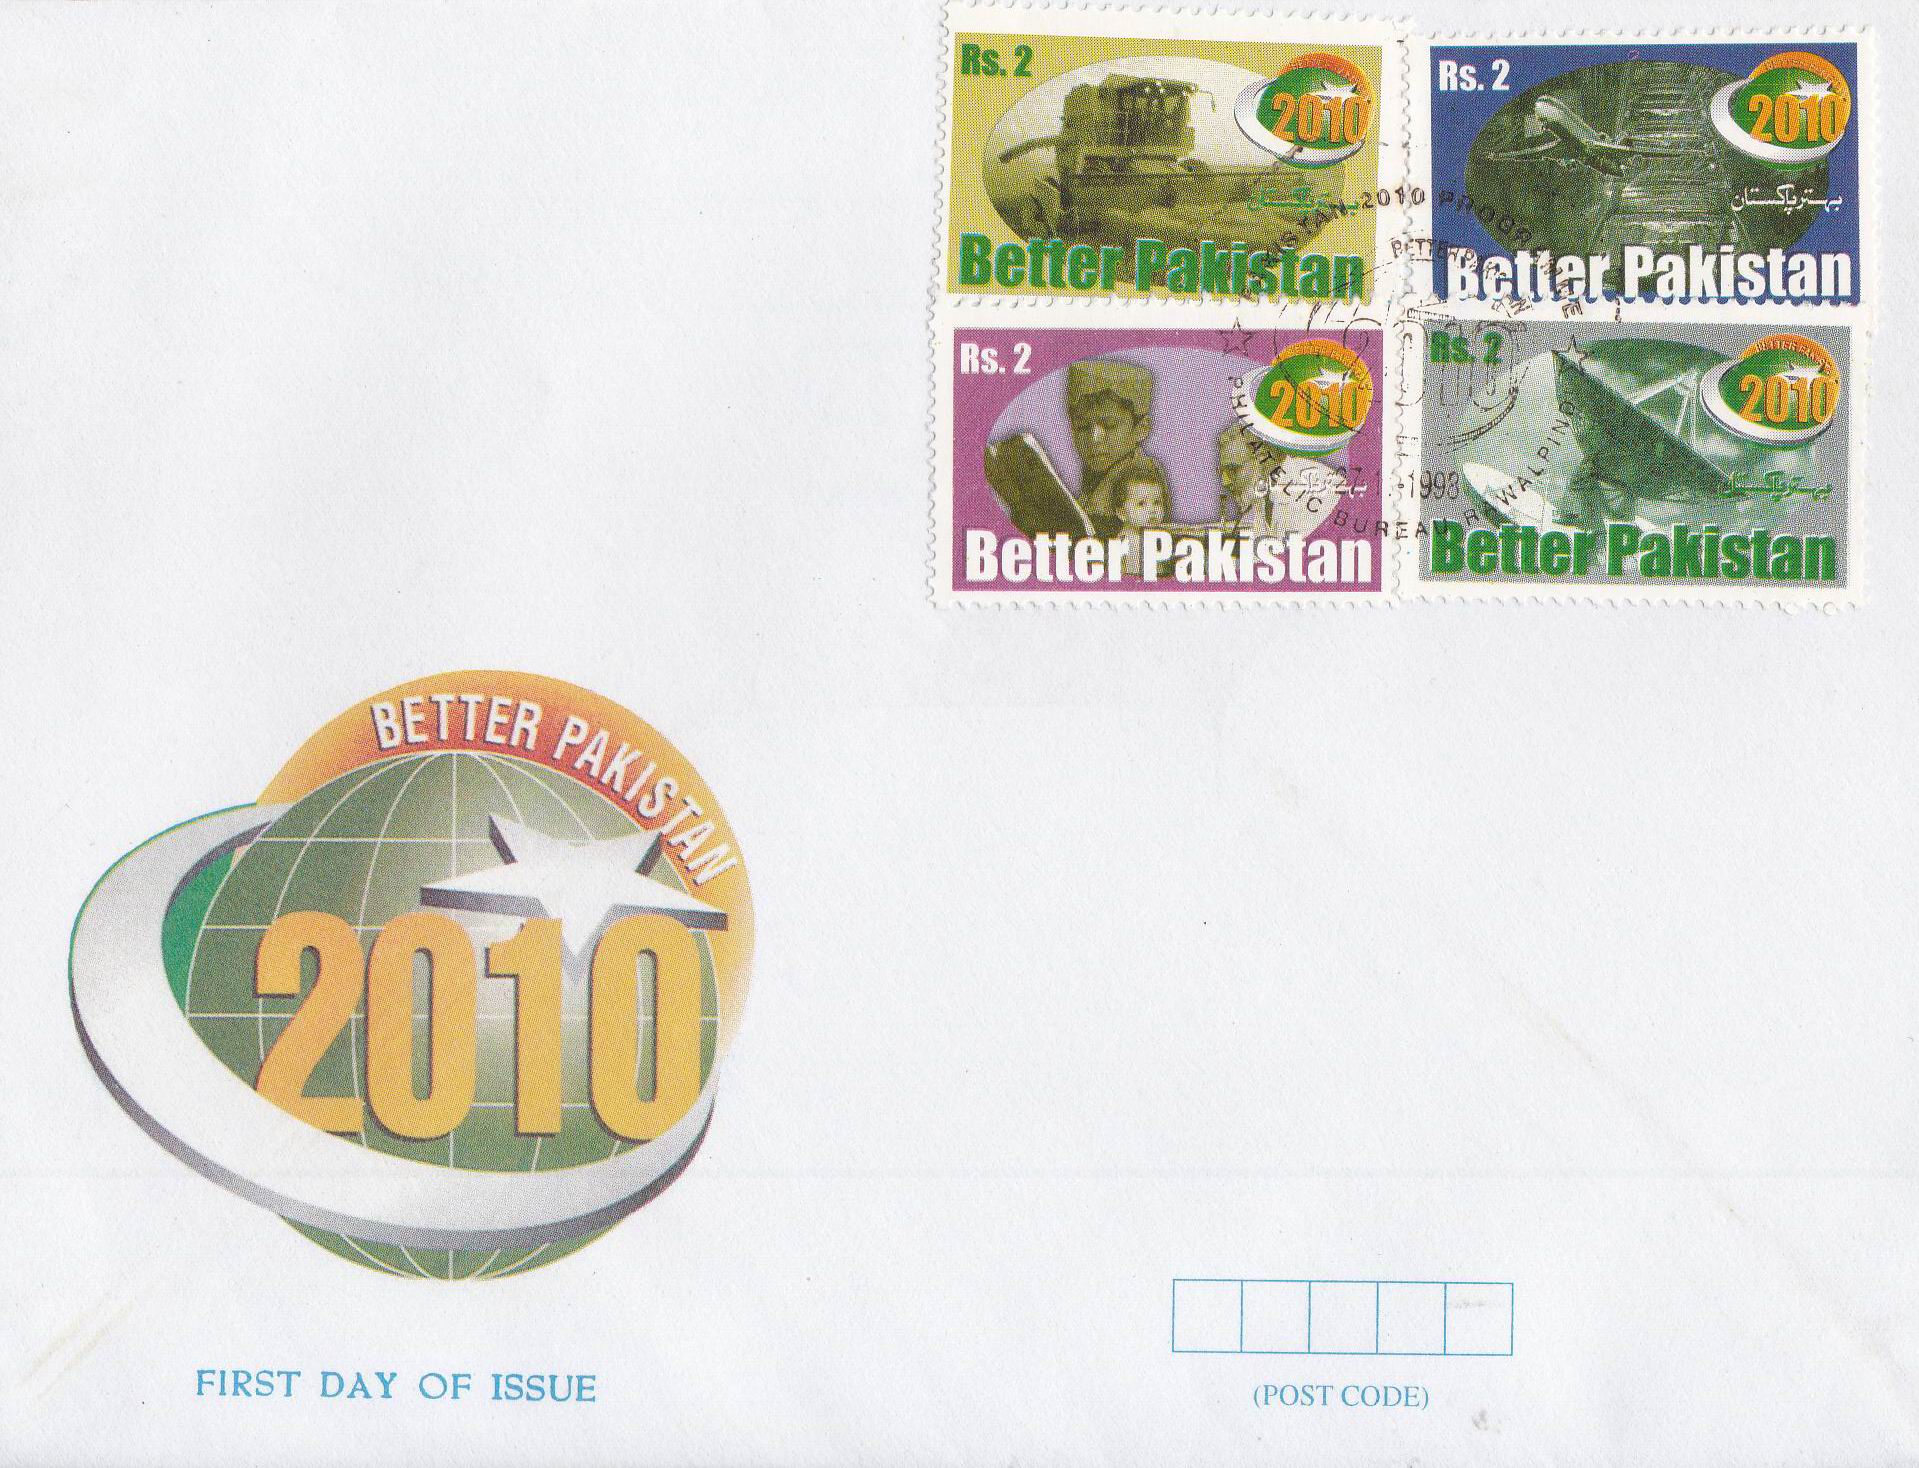 Pakistan Fdc 1998 Brochure & Stamps Better Pakistan - Click Image to Close